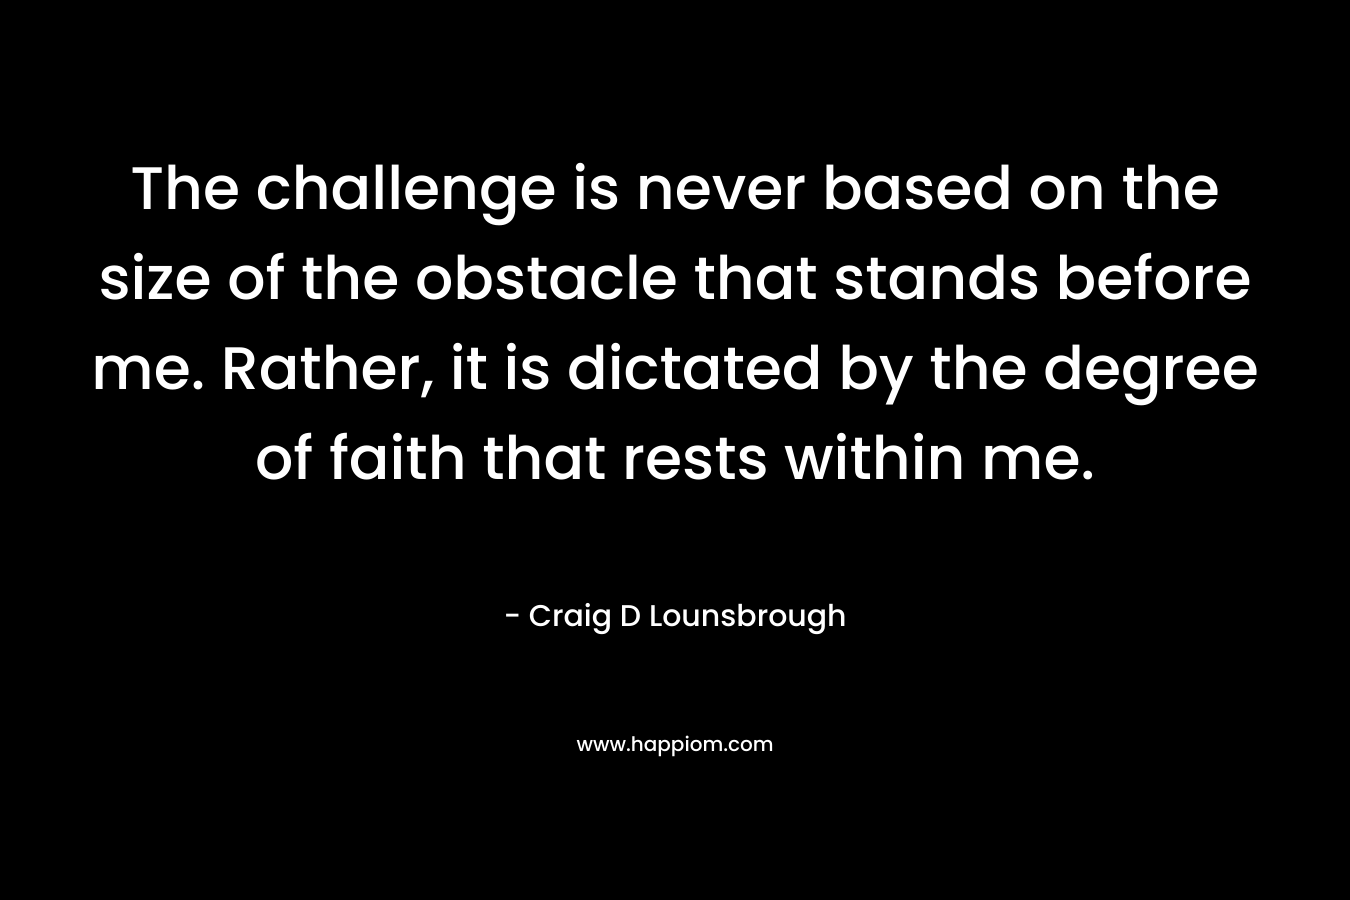 The challenge is never based on the size of the obstacle that stands before me. Rather, it is dictated by the degree of faith that rests within me.